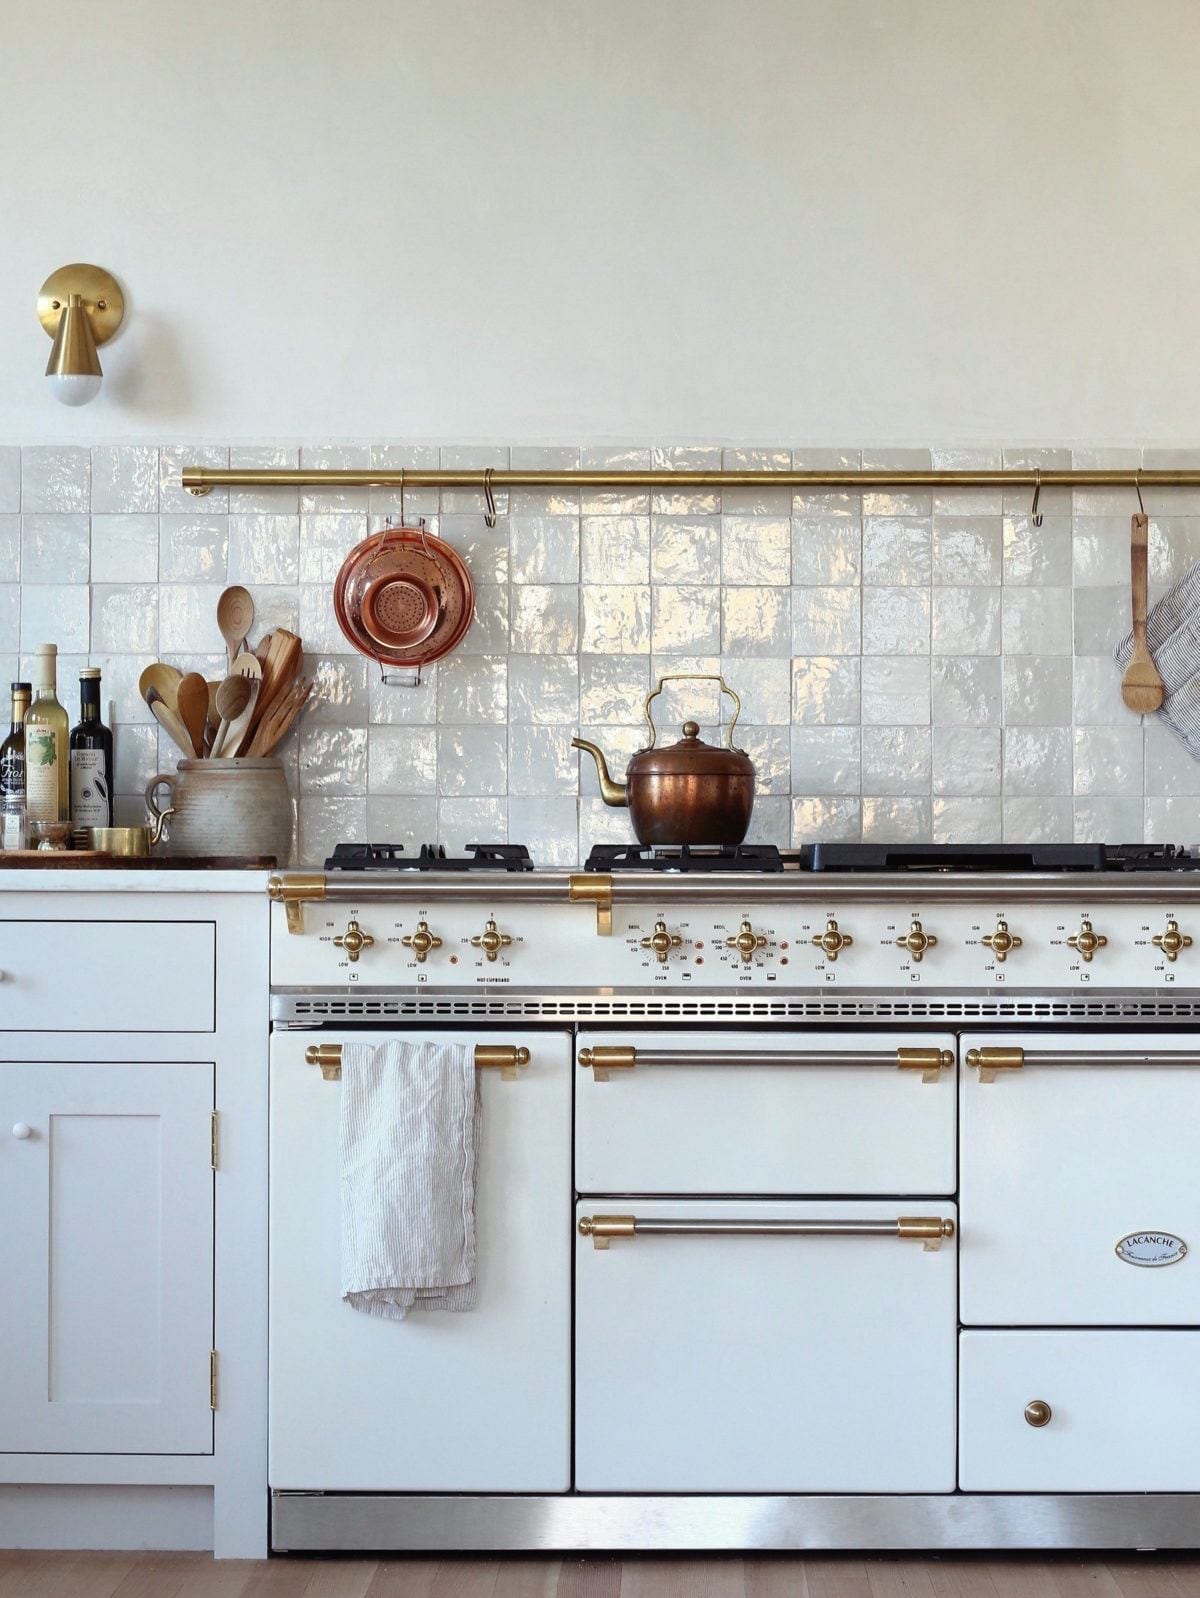 Subway Tile Alternative Everyone Knows About But Me - Laurel Home